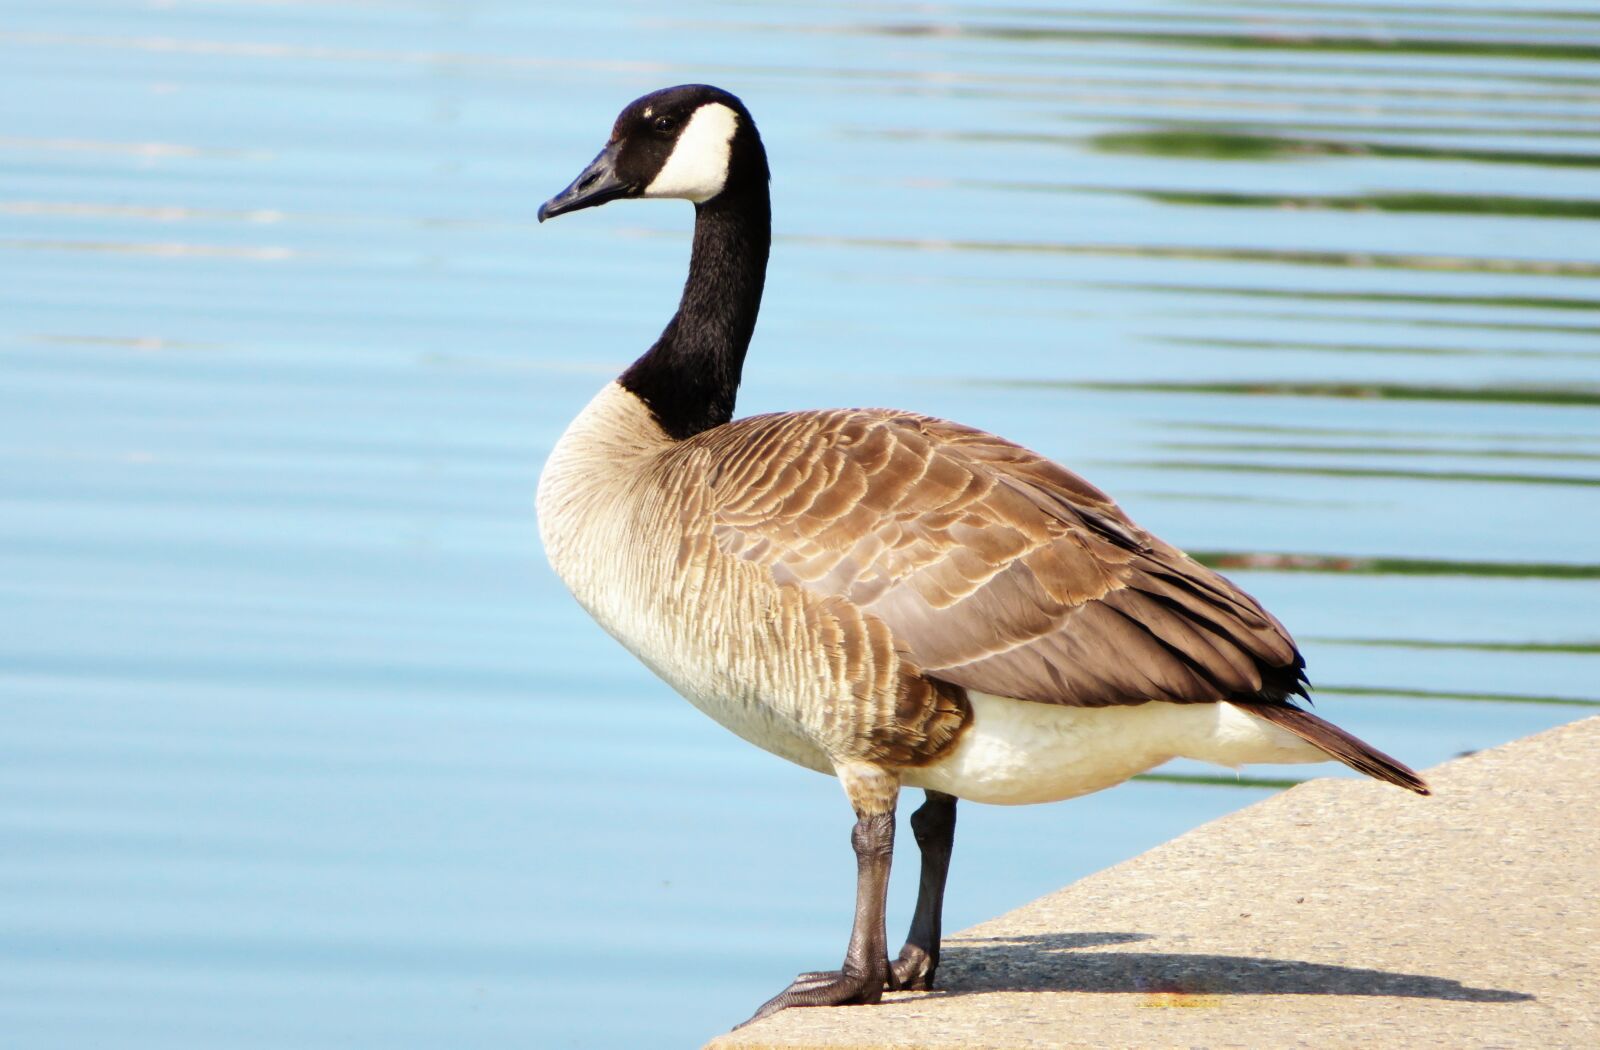 4.3 - 172.0 mm sample photo. Canada goose, waterfowl, animal photography